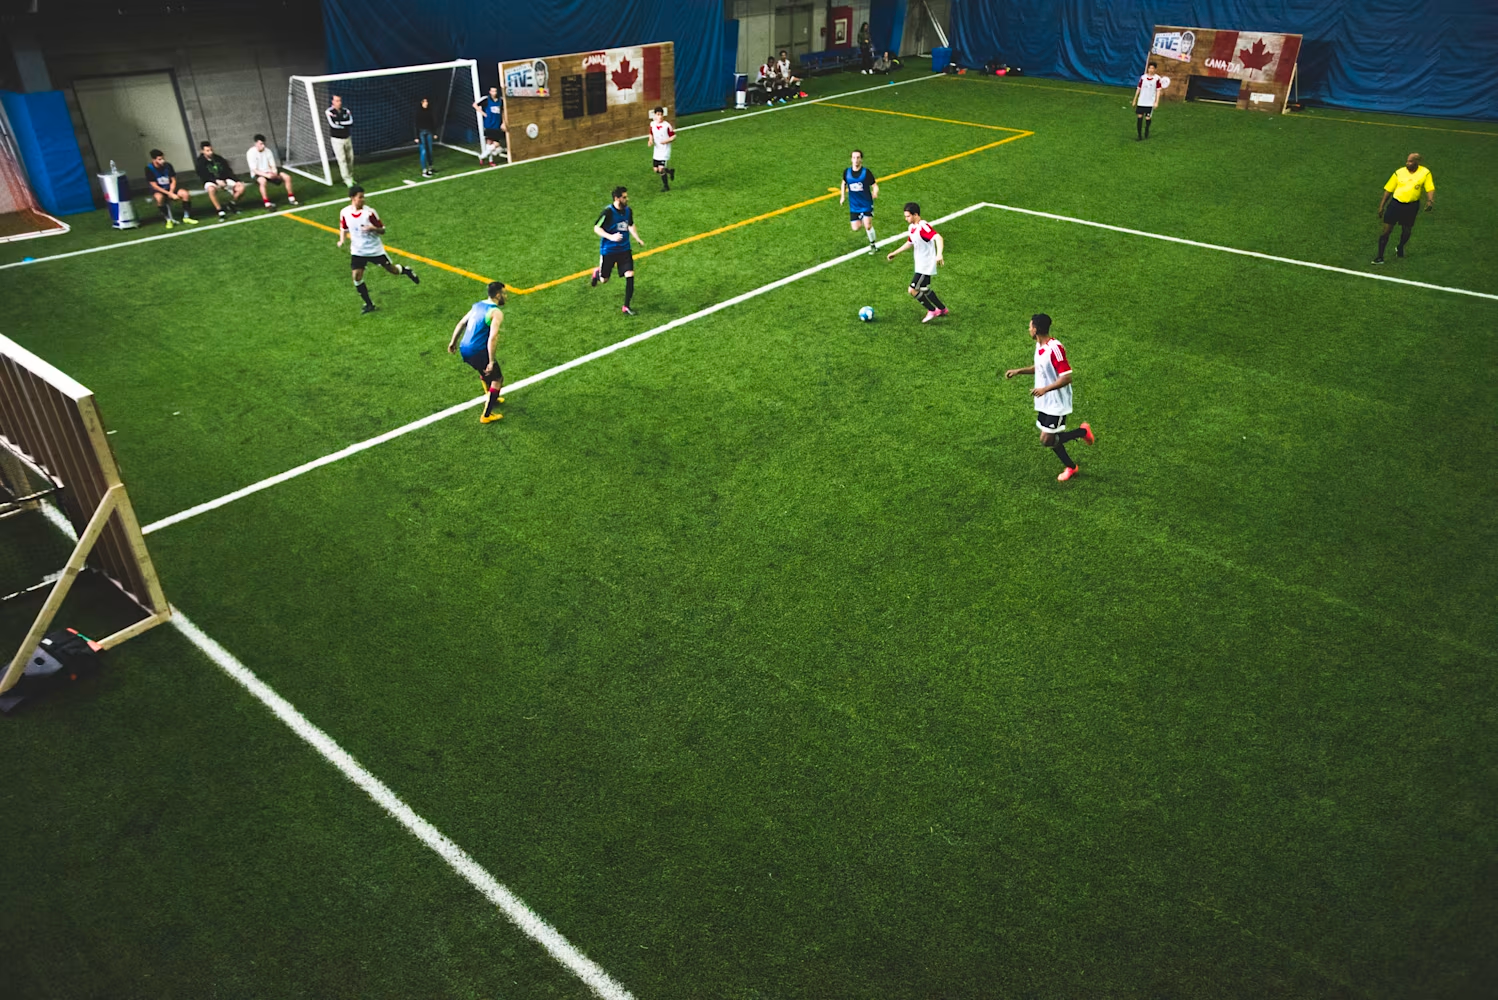 Where do I find indoor sports facilities in NYC to play soccer in? Look no further… OpenGym has you covered!